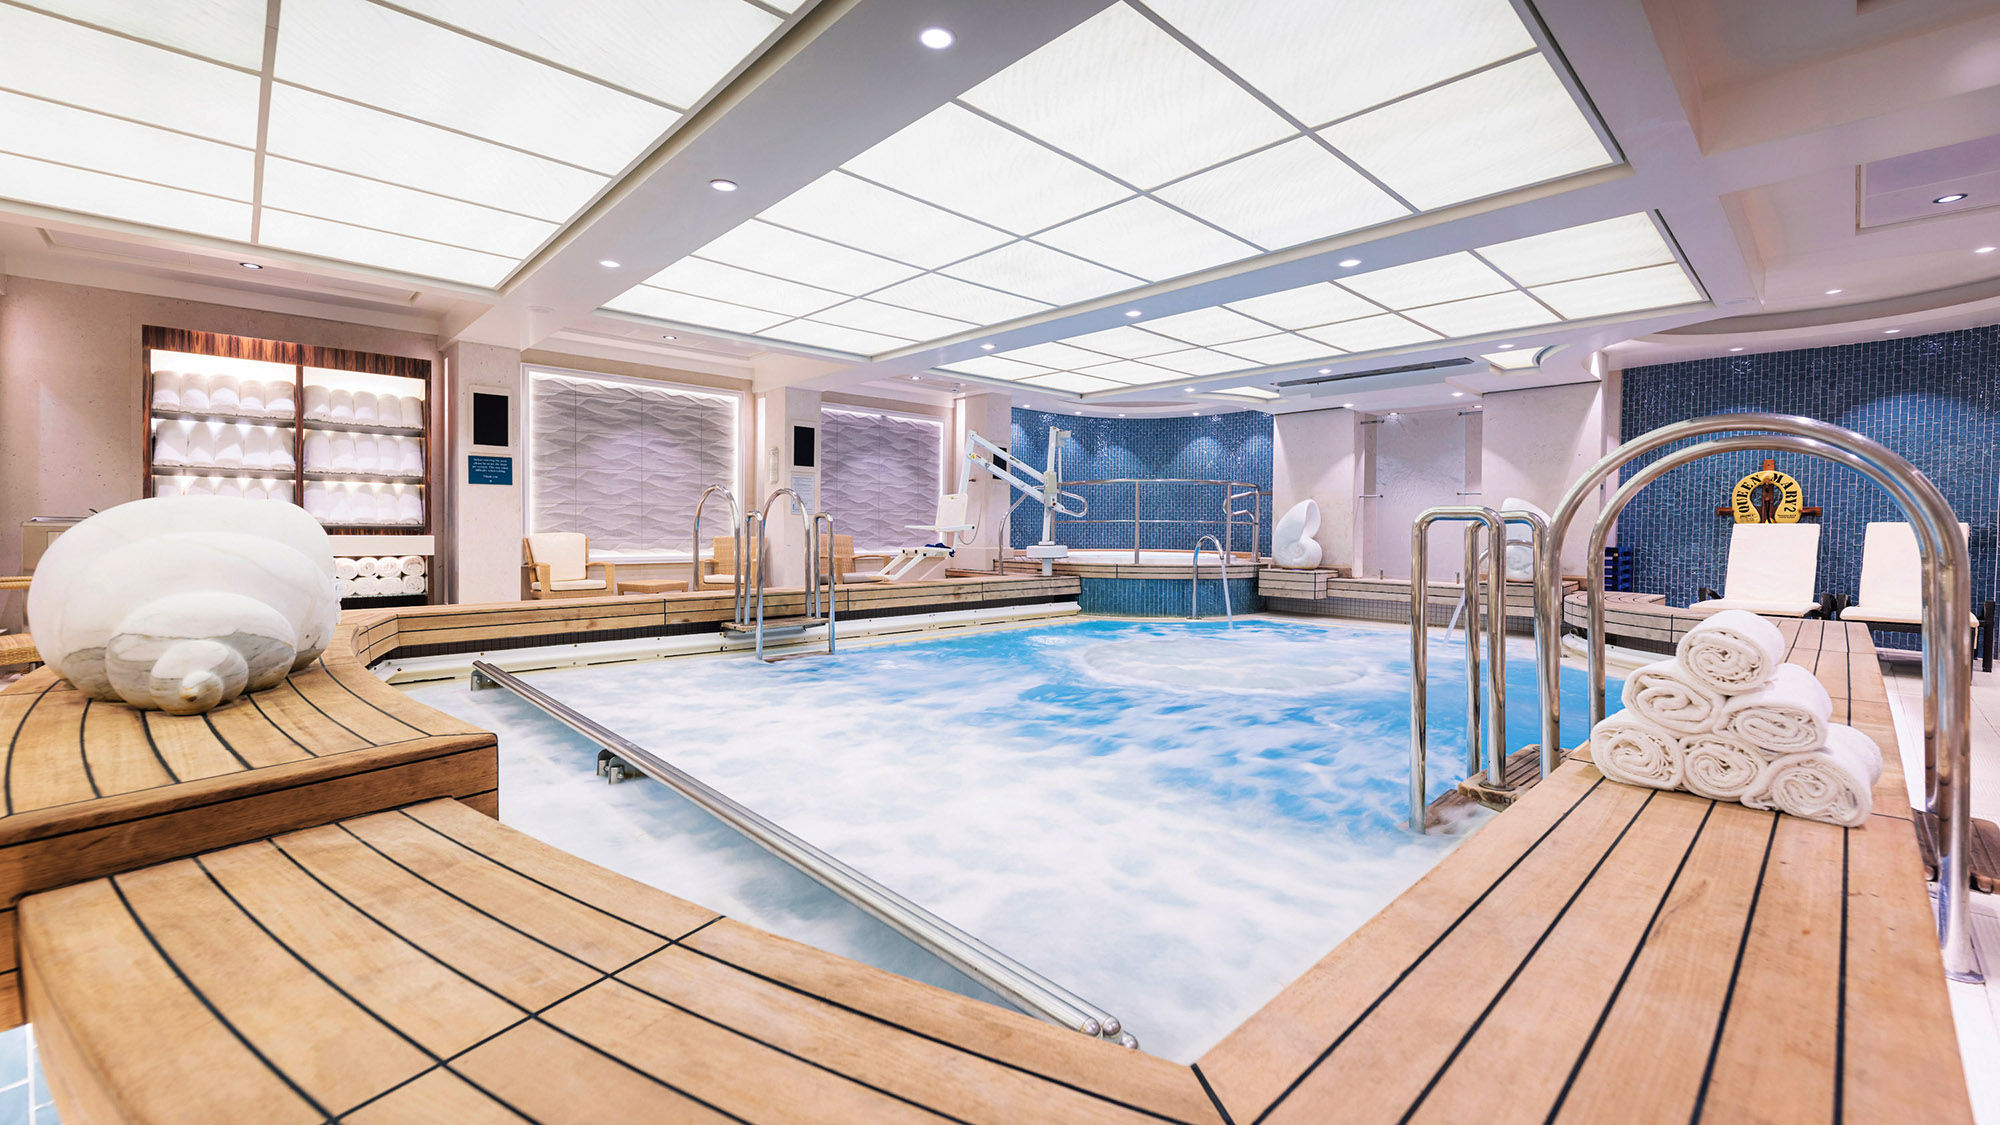 The ship's Mareel Wellness & Beauty spa features a renewed focus on design and treatments inspired by the ocean.